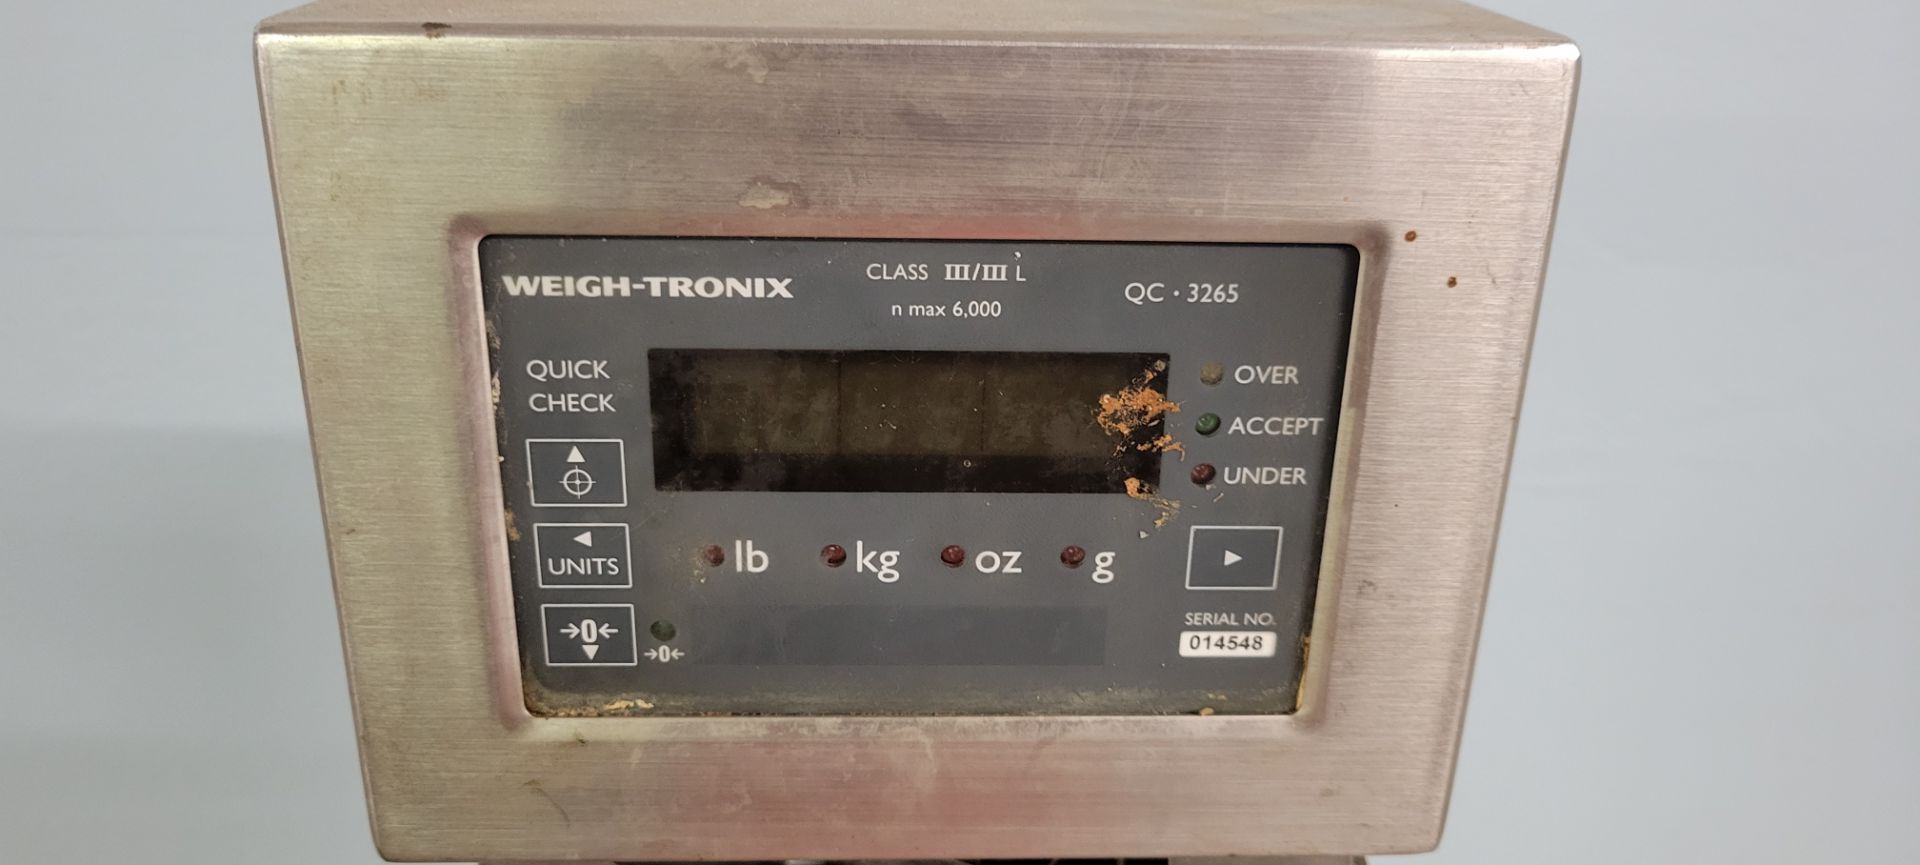 Weigh-Tronix Platform Scale - Image 2 of 3